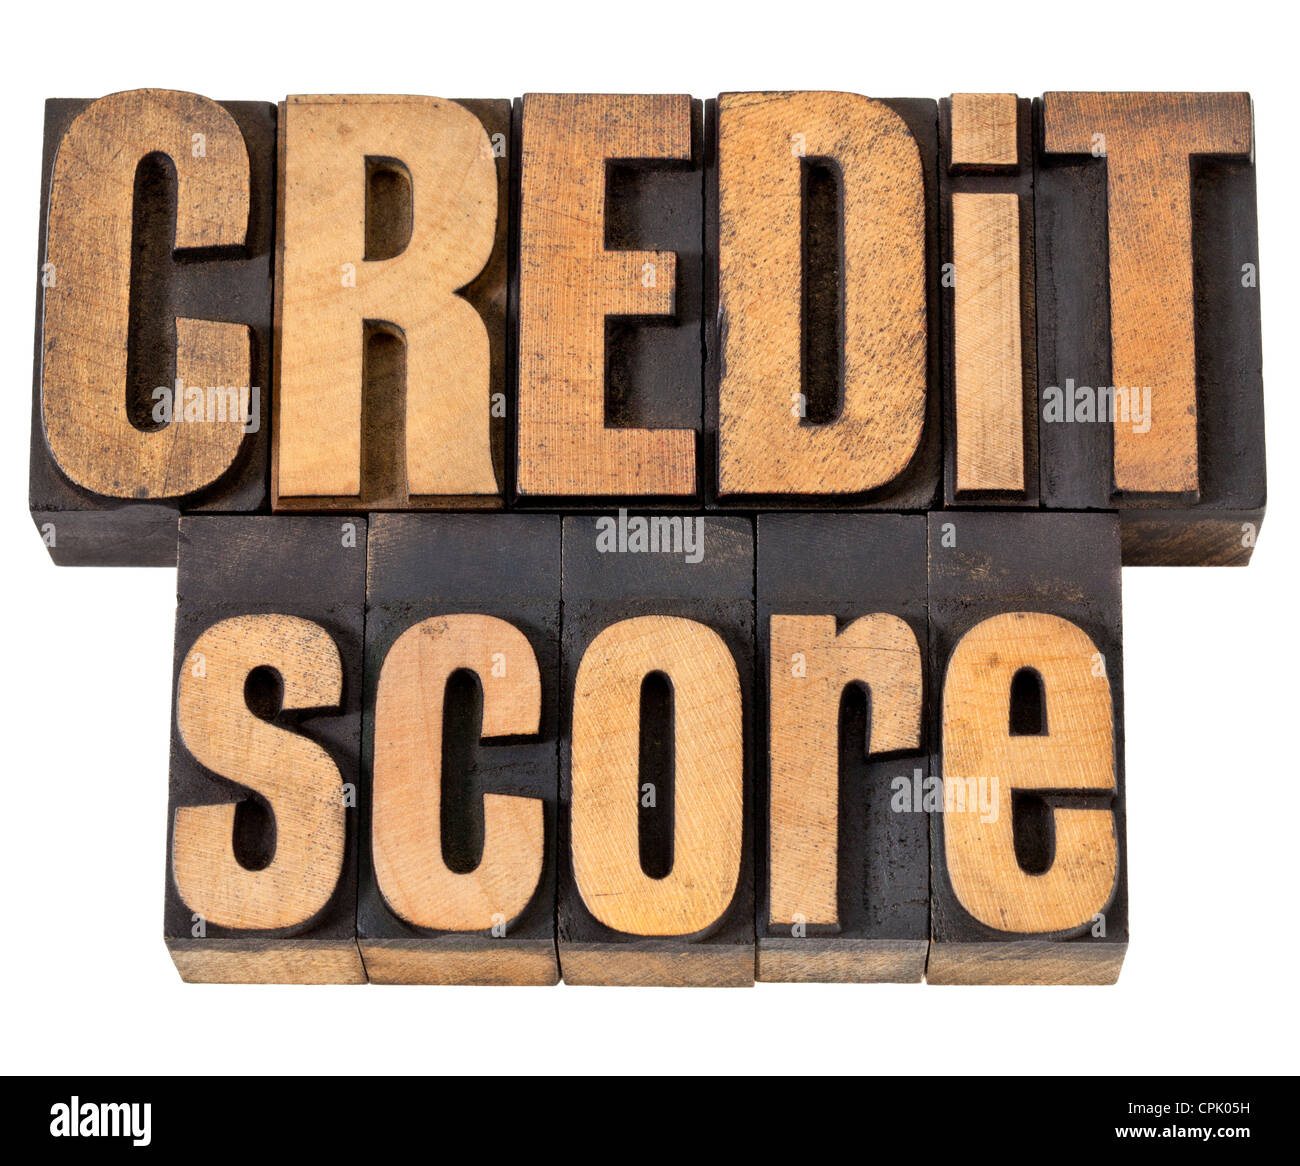 credit score - isolated text in vintage letterpress wood type Stock Photo